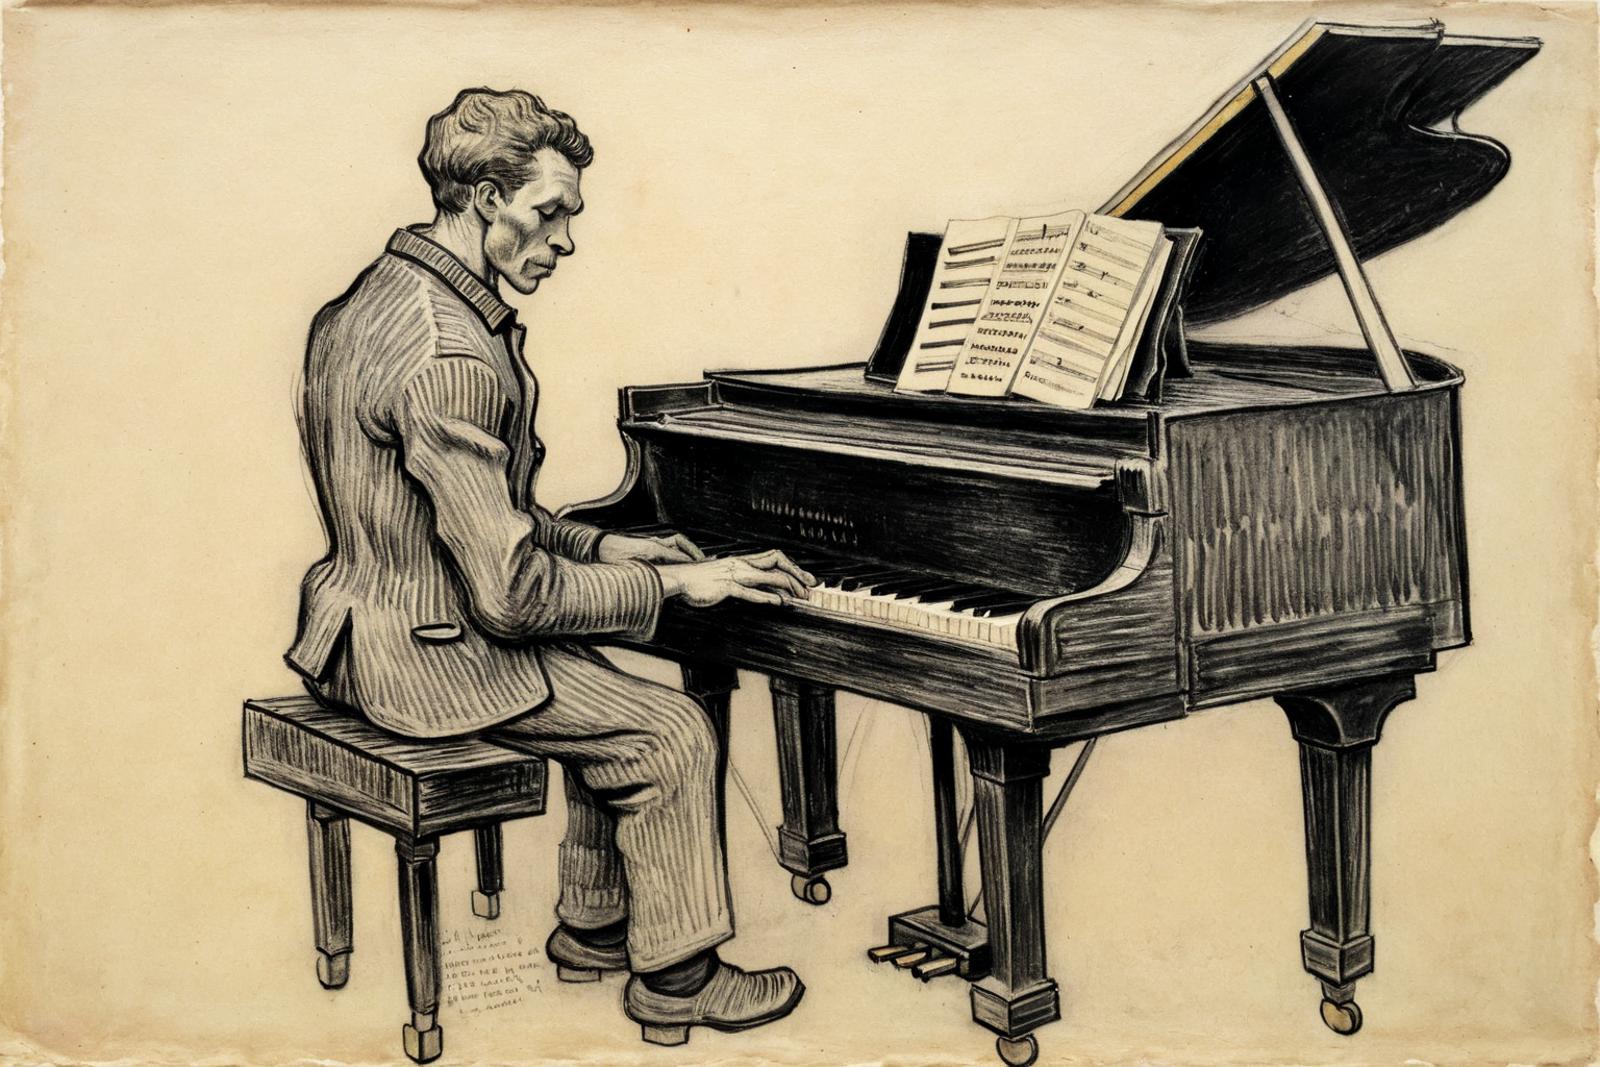 A man playing a piano with sheet music in front of him.